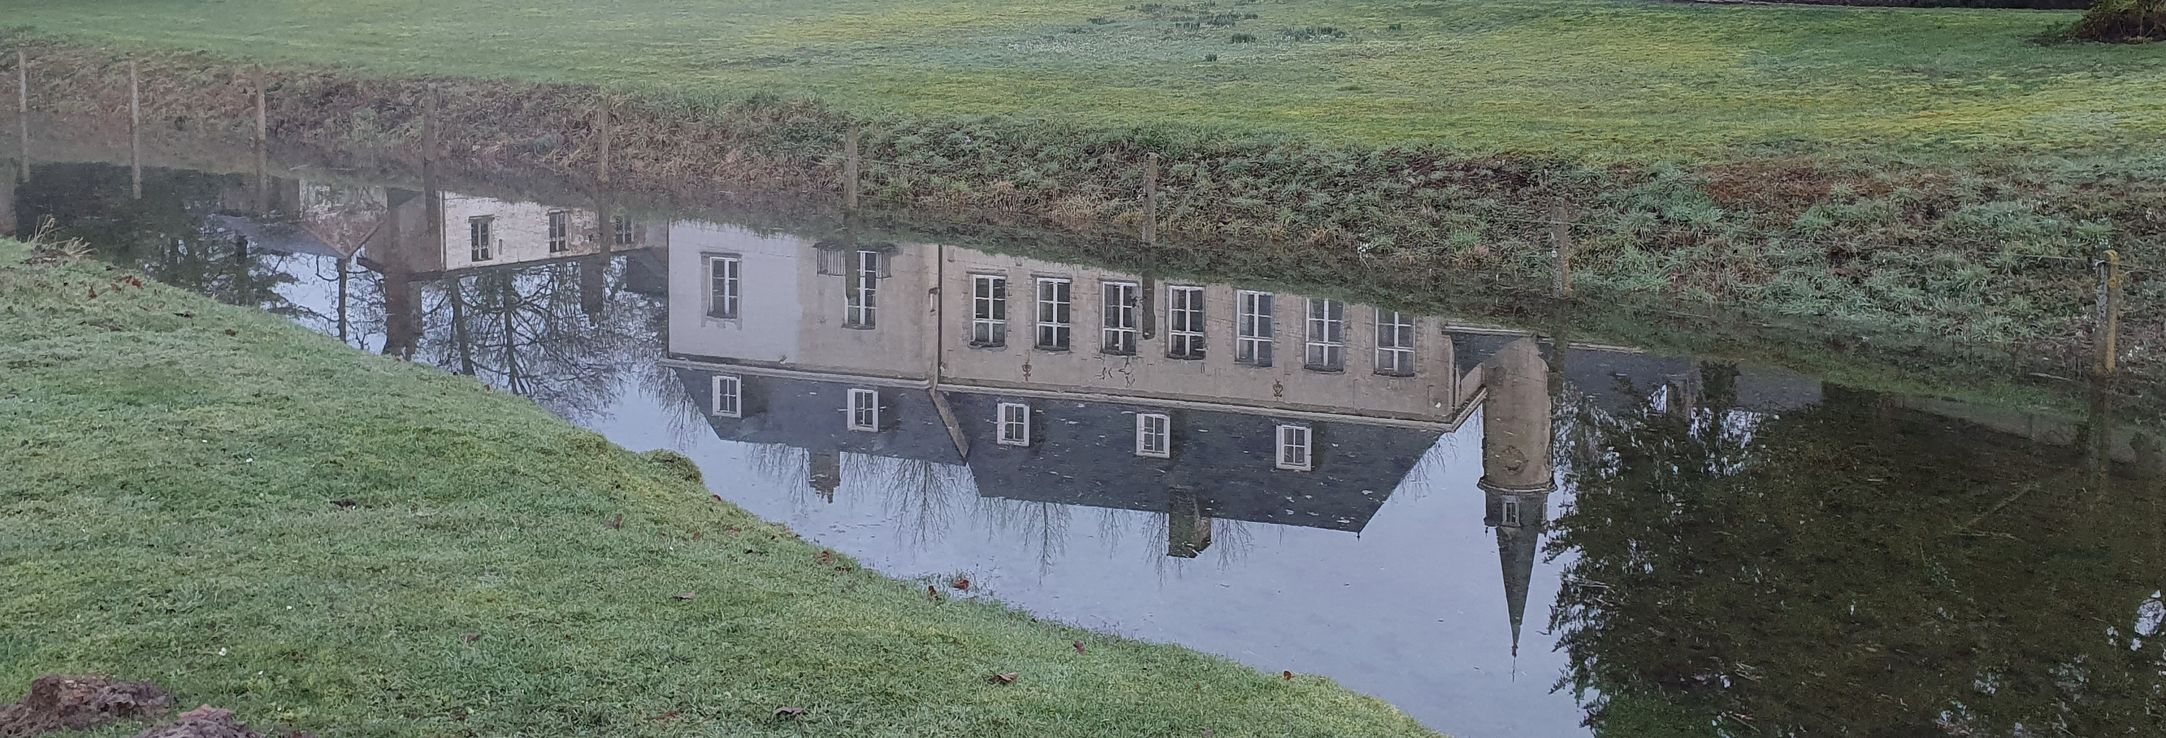 Sauliniere castle moat with a reflection on the castle